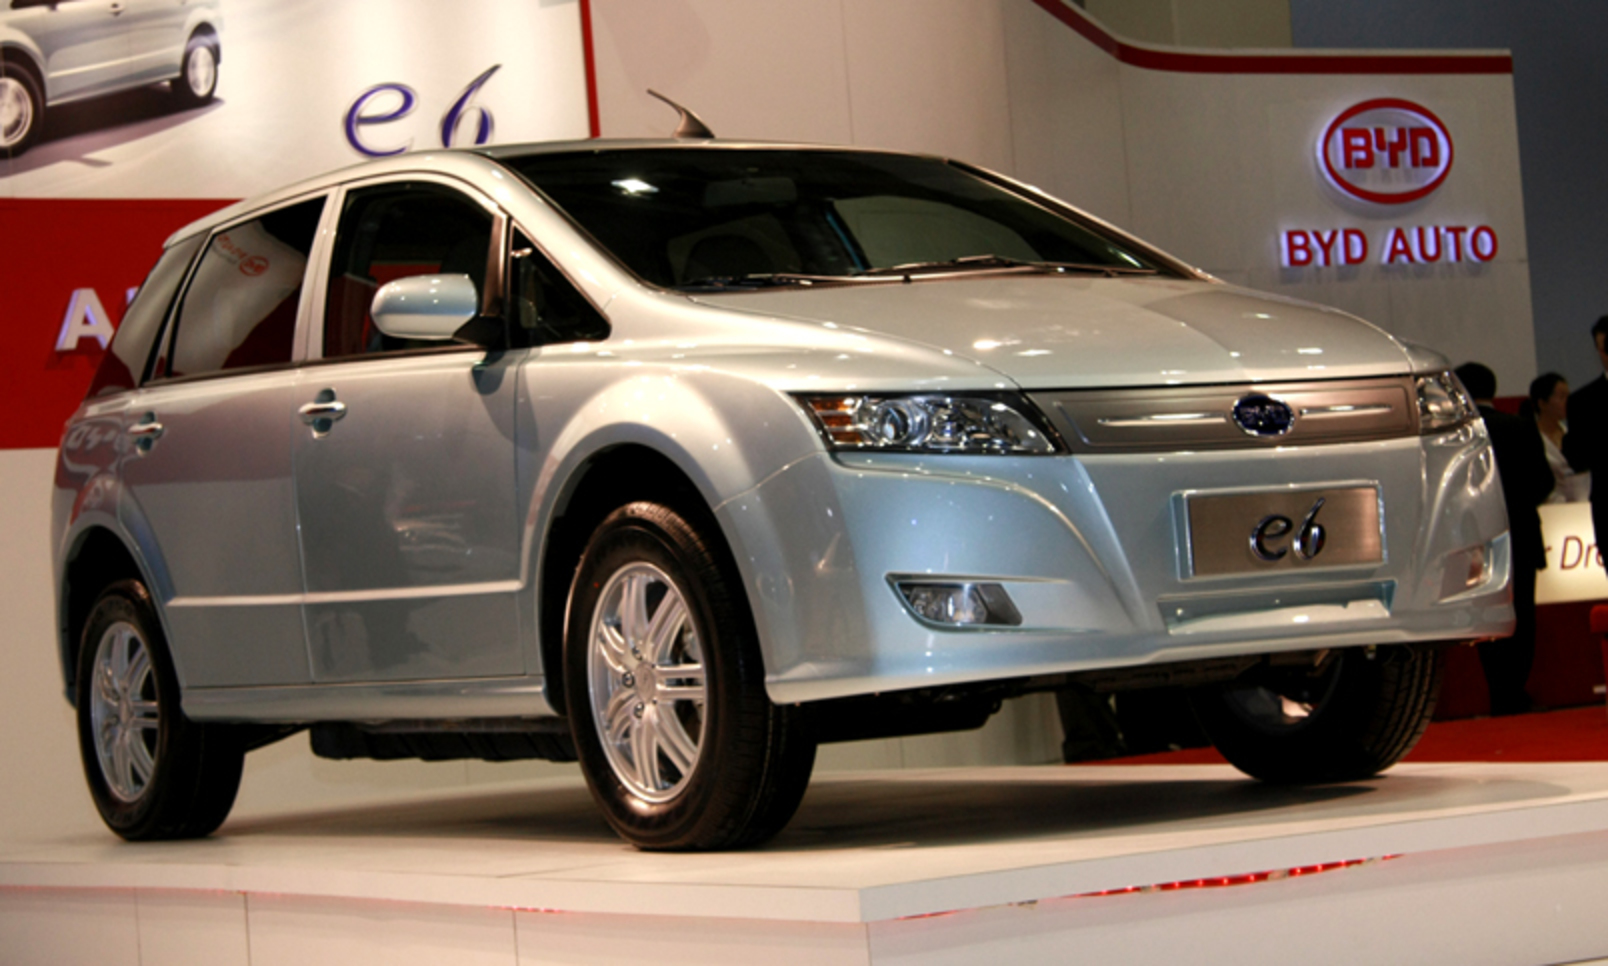 Byd e6. Best photos and information of model.